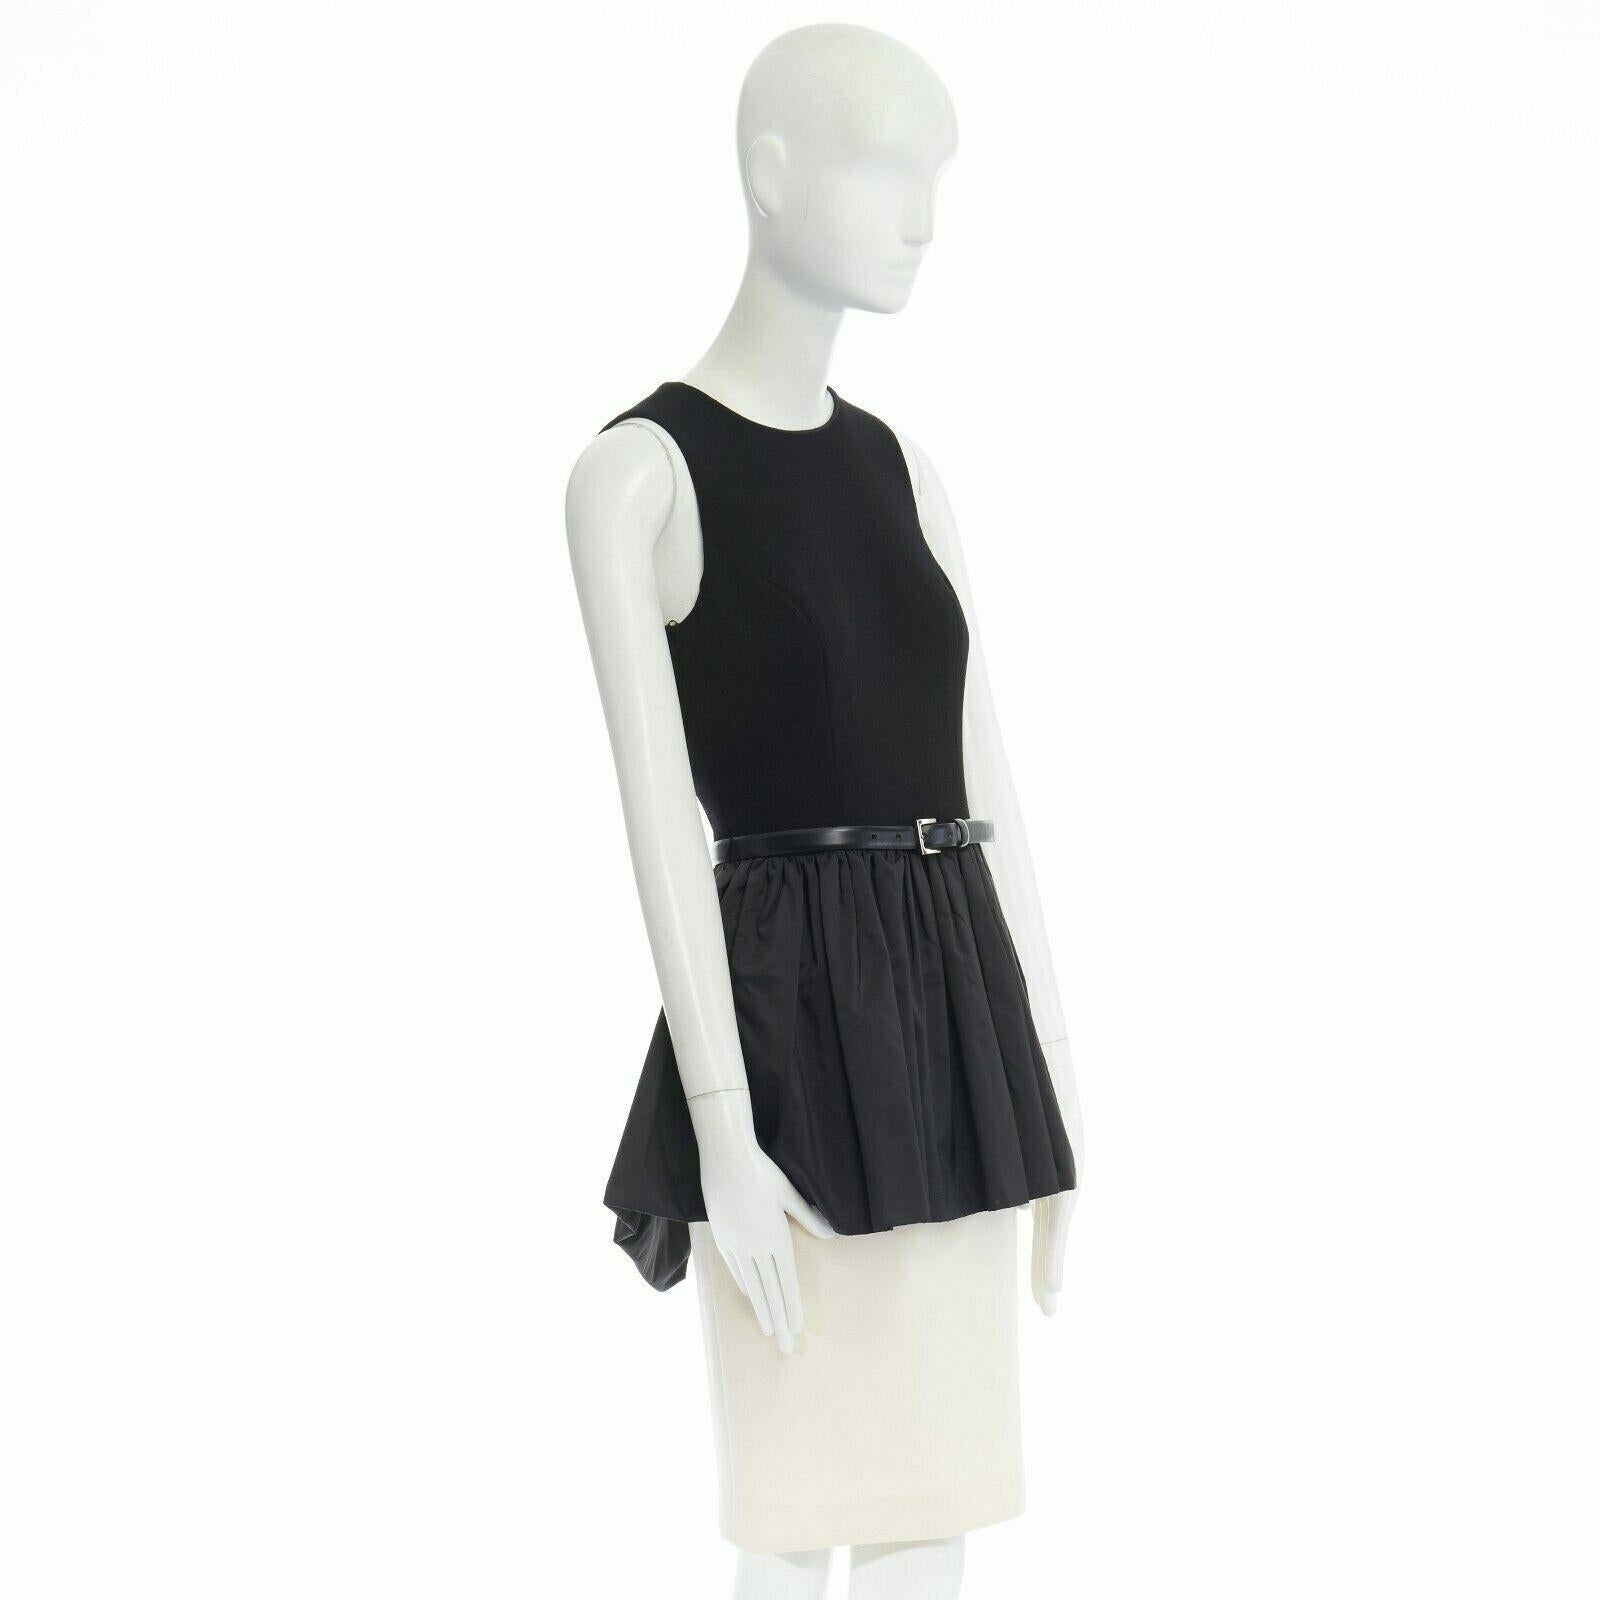 Gray MICHAEL KORS COLLECTION black leather belted peplum white skirt dress US2 XS For Sale